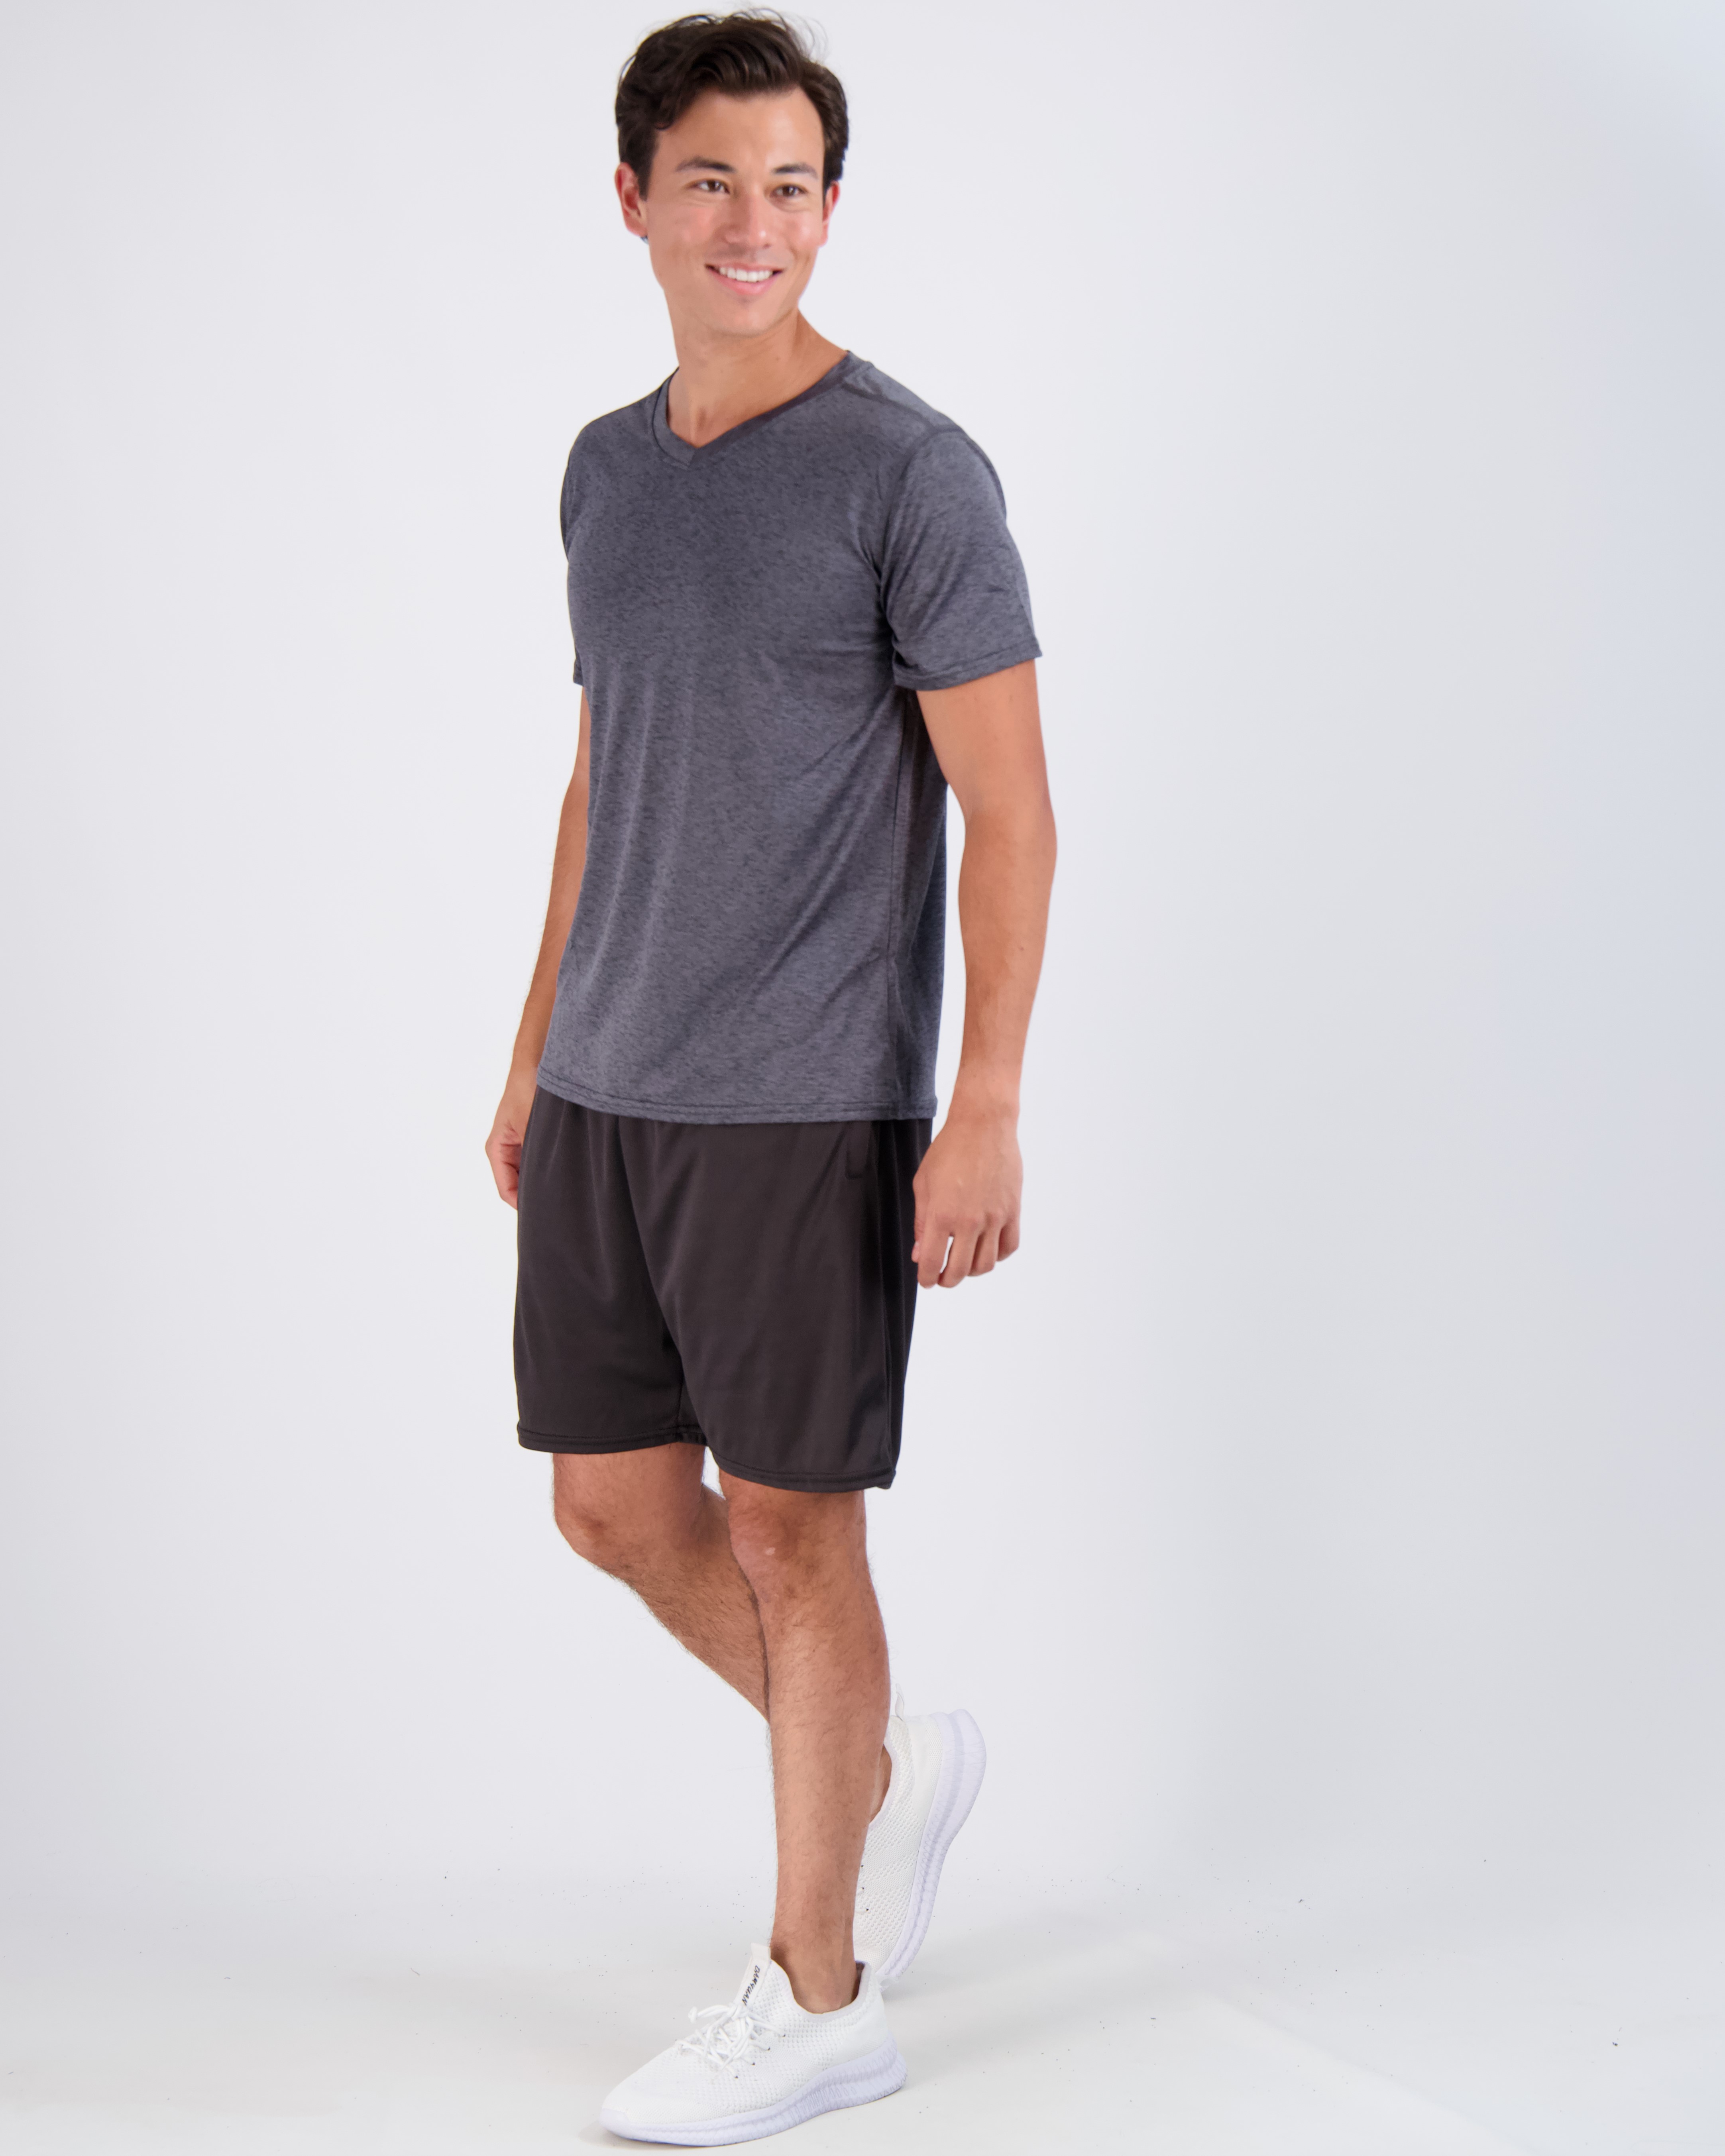 Real Essentials 5 Pack: Men’s V-Neck Dry-Fit Moisture Wicking Active ...